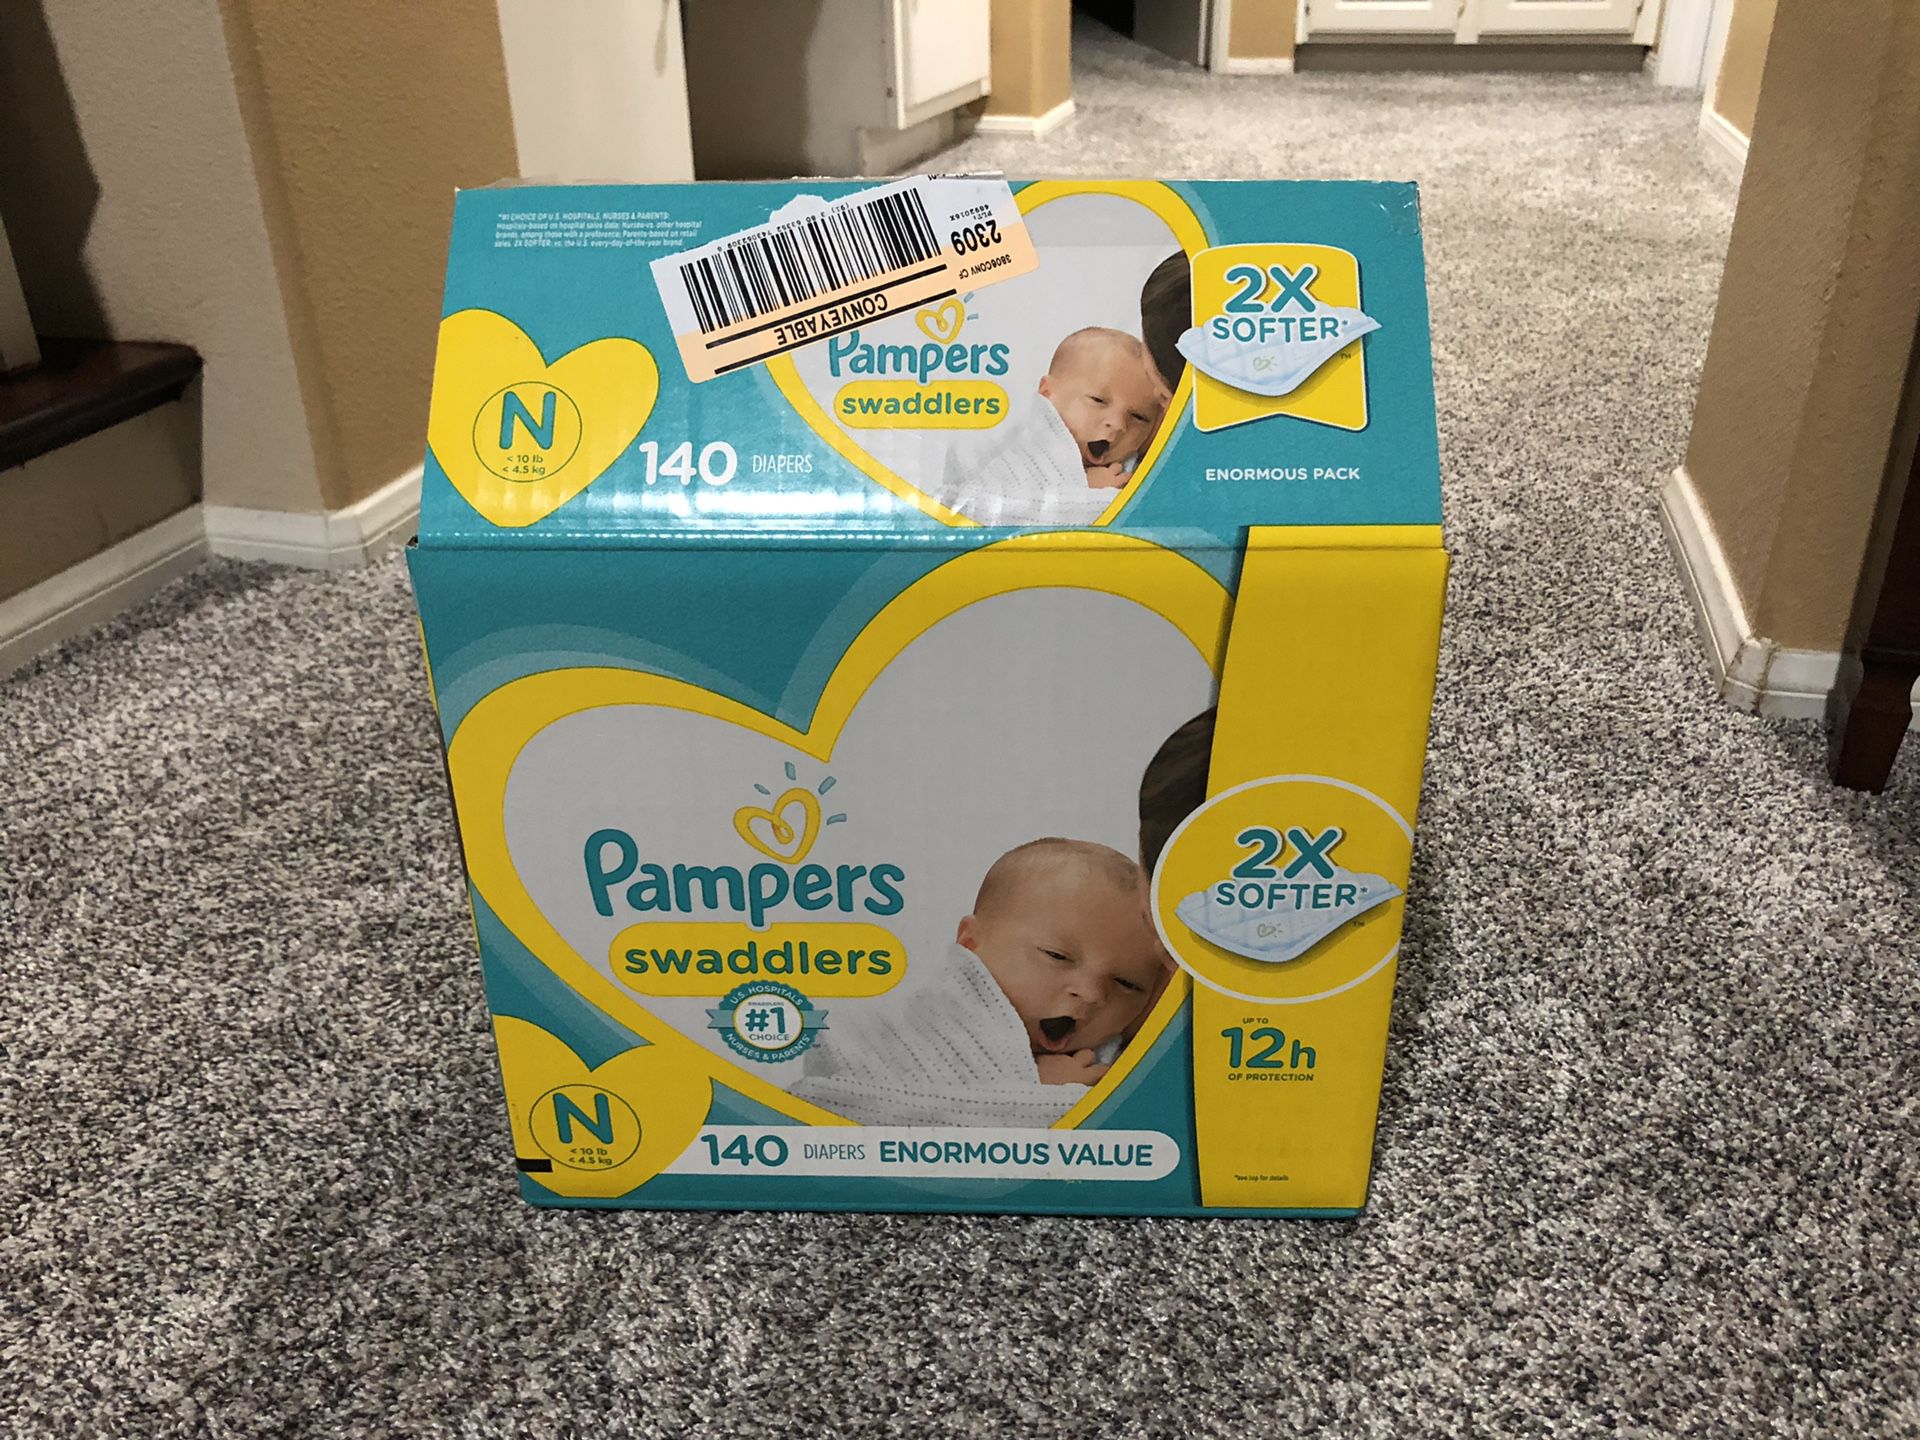 Pampers Swaddlers Newborn Diapers